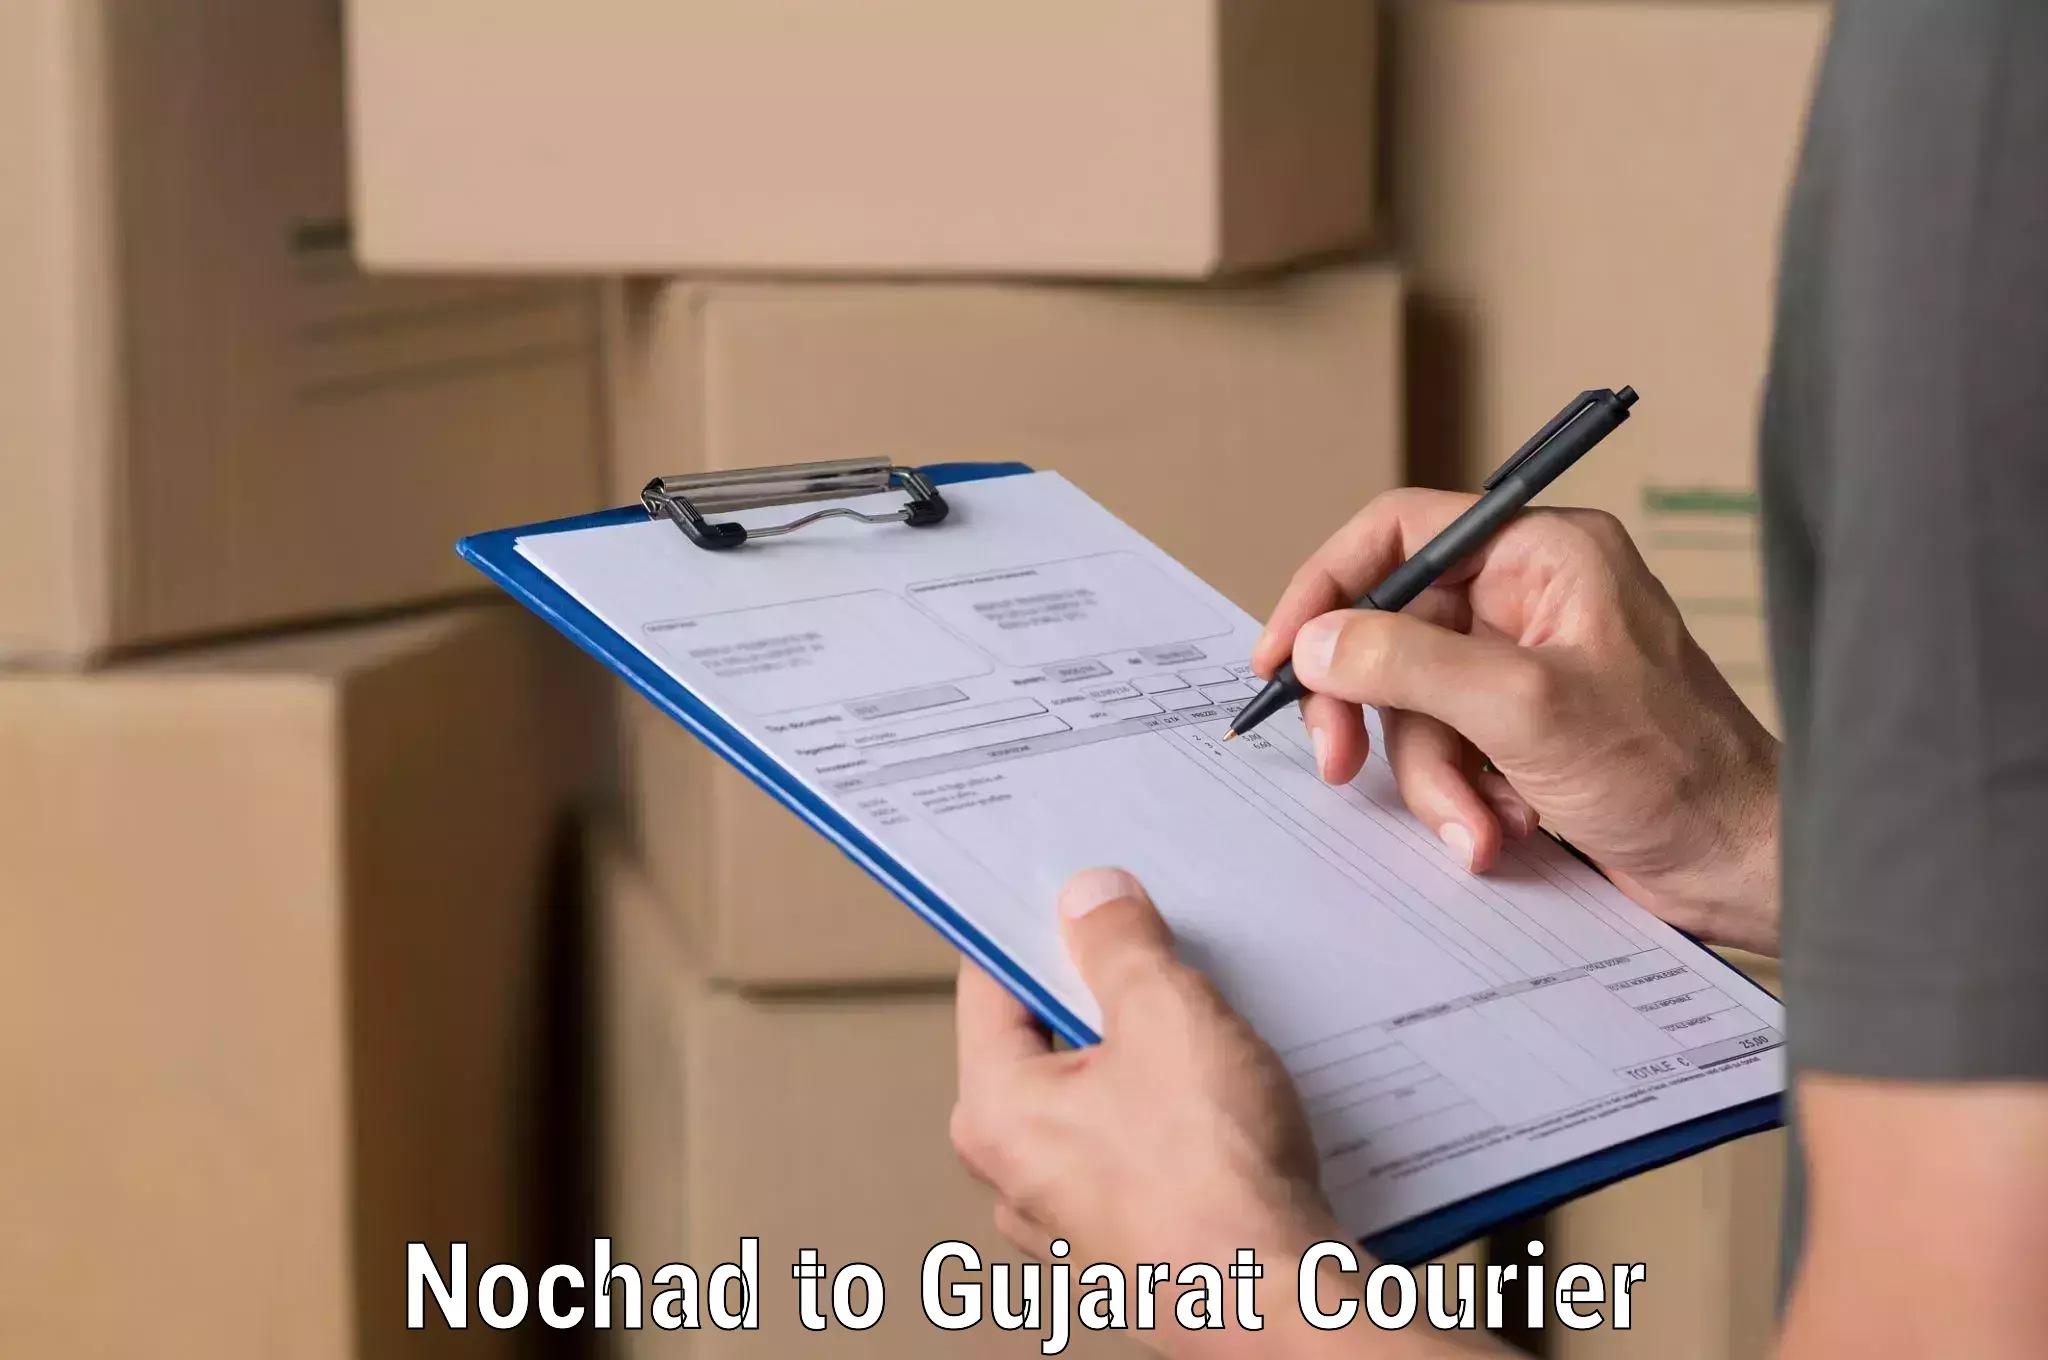 Delivery service partnership Nochad to Tapi